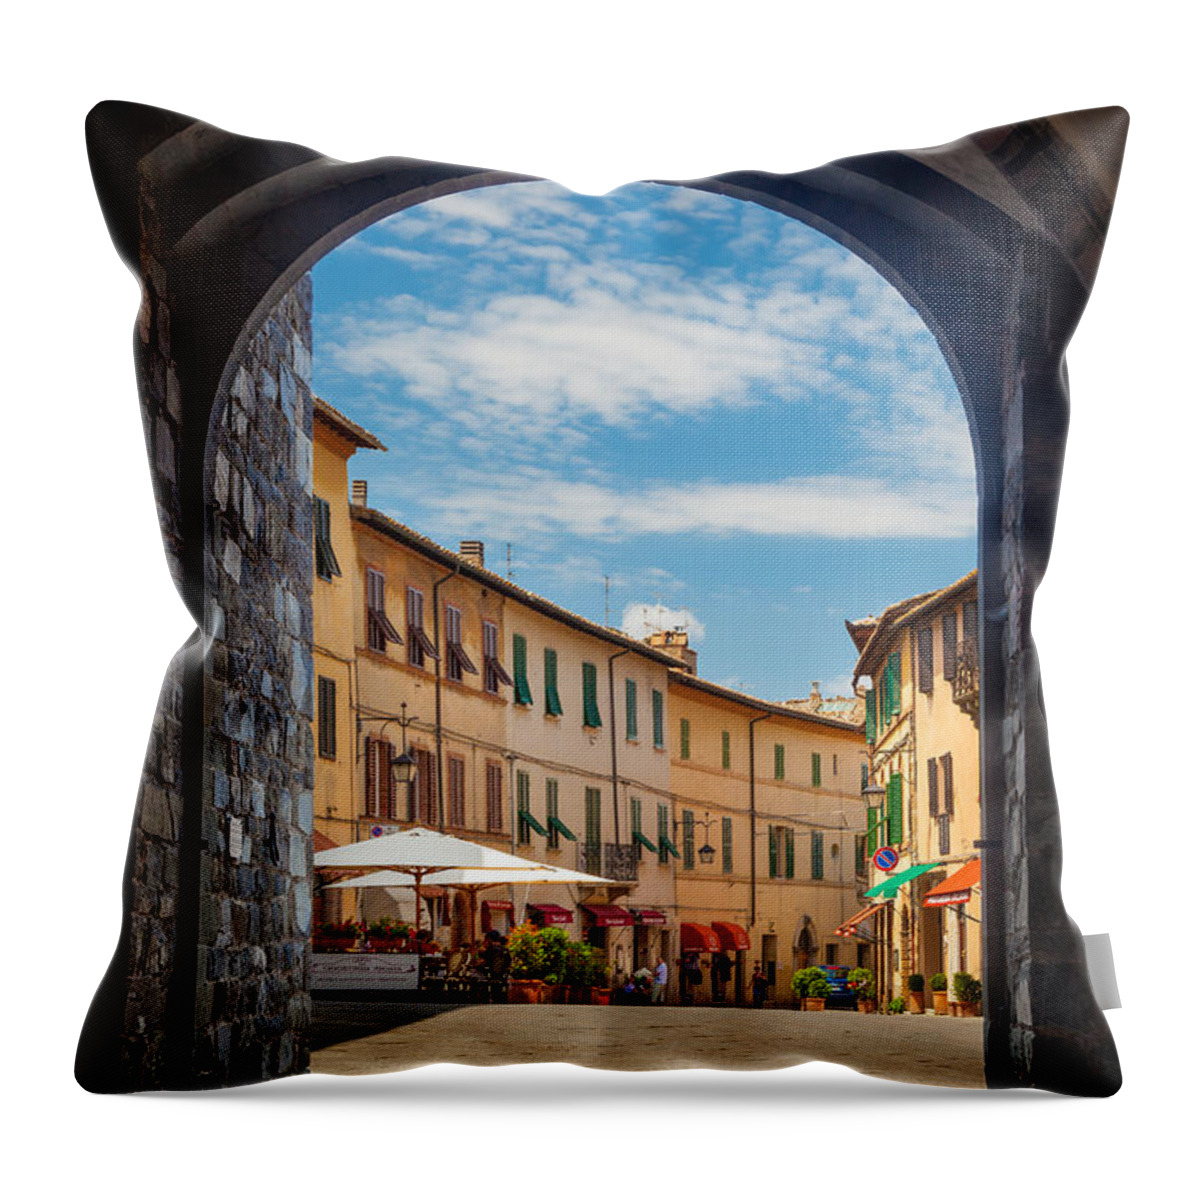 Europe Throw Pillow featuring the photograph Montalcino Loggia by Inge Johnsson